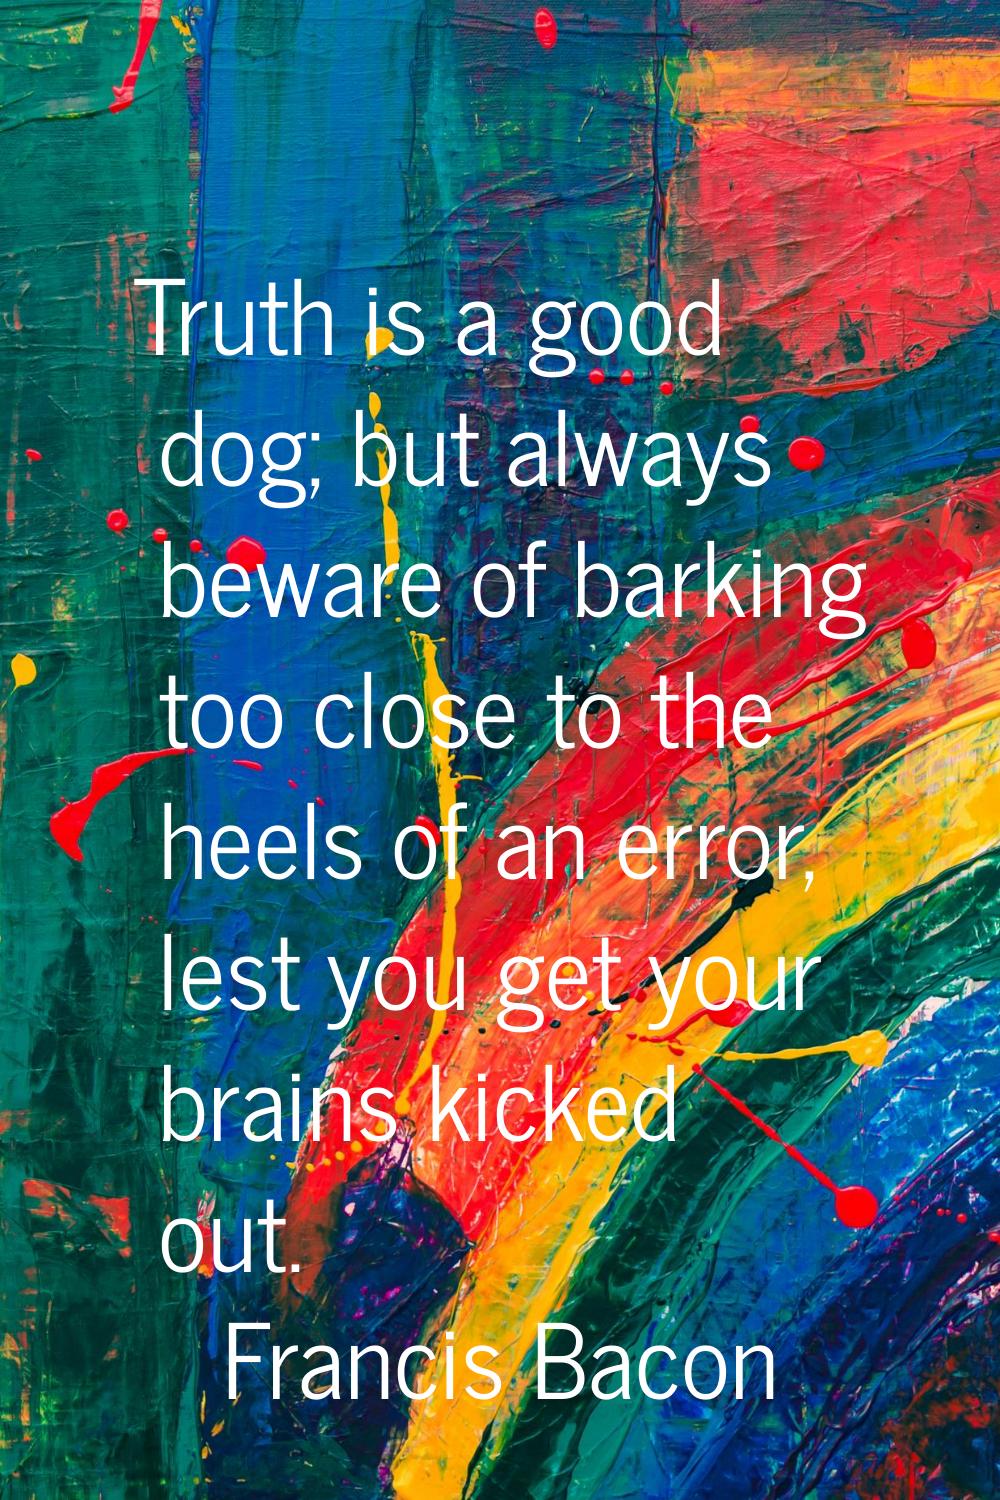 Truth is a good dog; but always beware of barking too close to the heels of an error, lest you get 